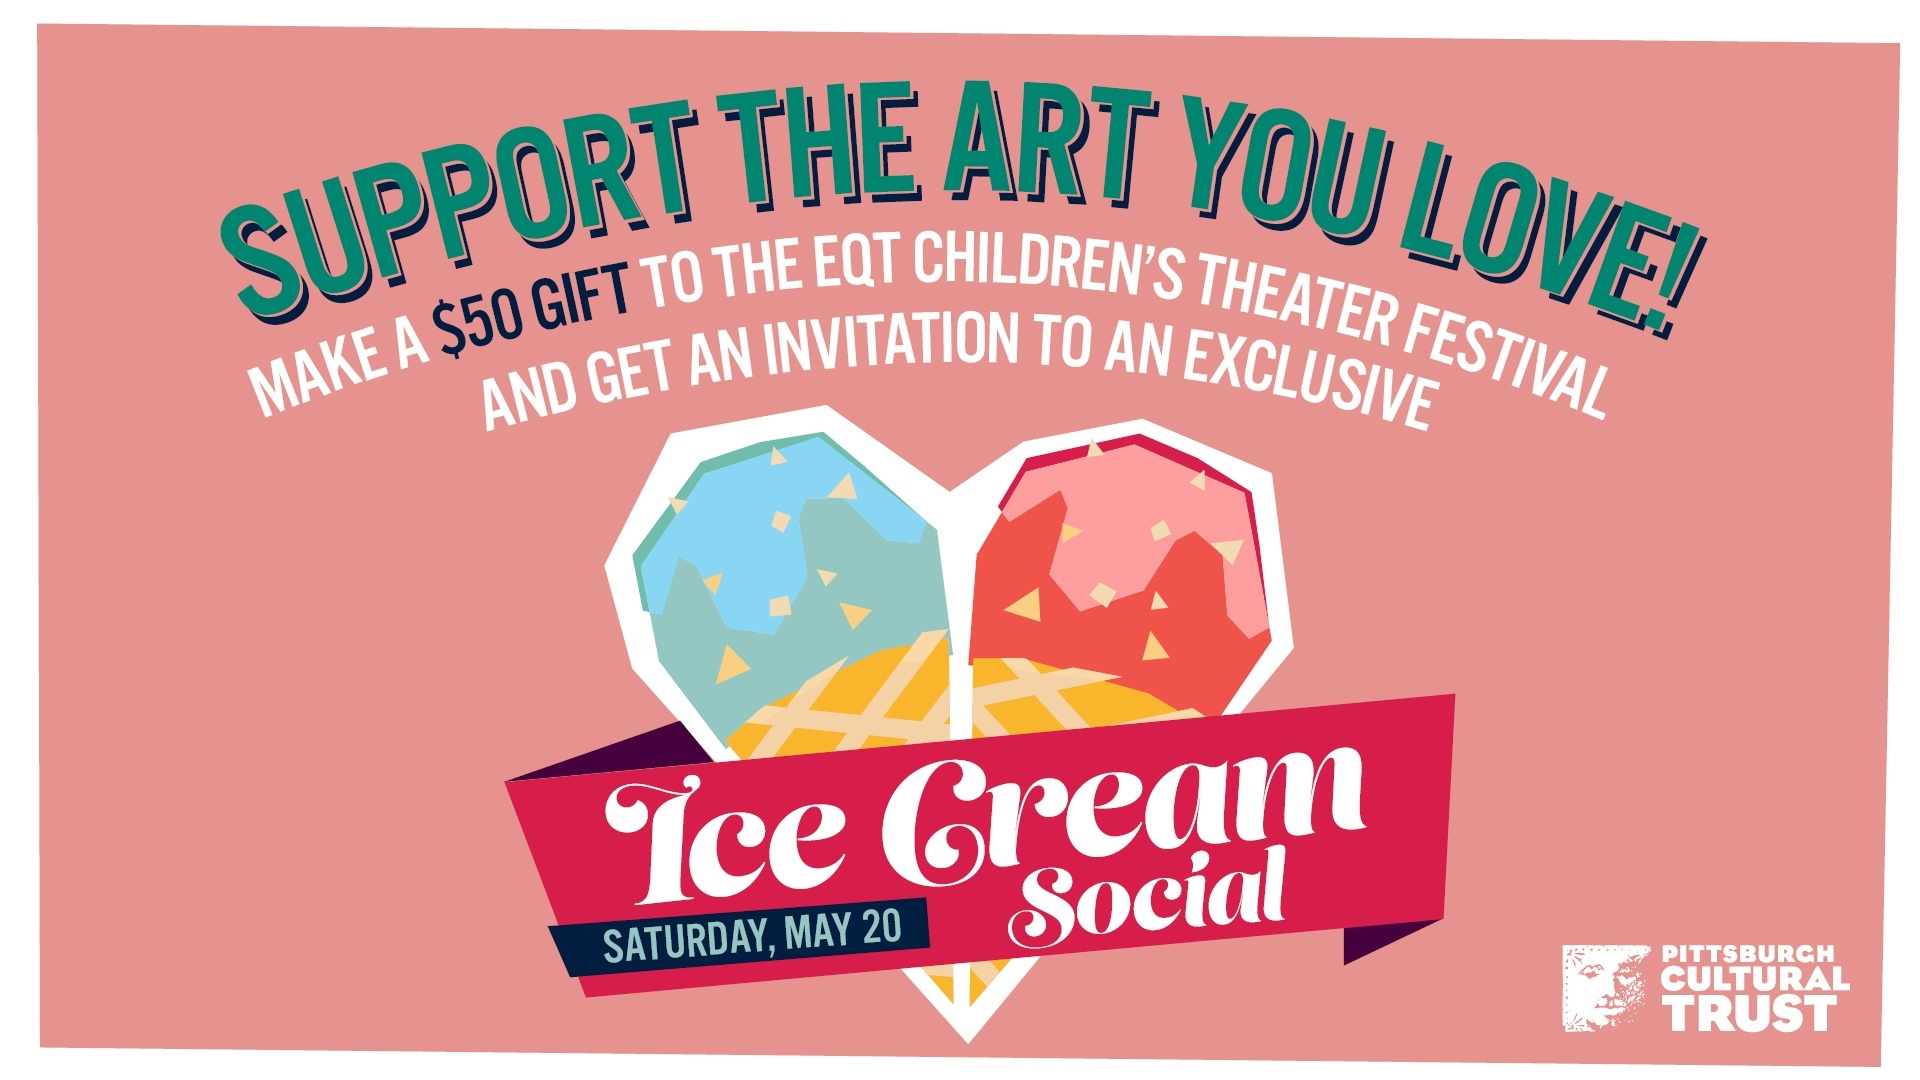 Support the art you love! Make a $50 gift to the EQT Children's Theater Festival and get and invitation to an exclusive ice cream social on Saturday, May 20